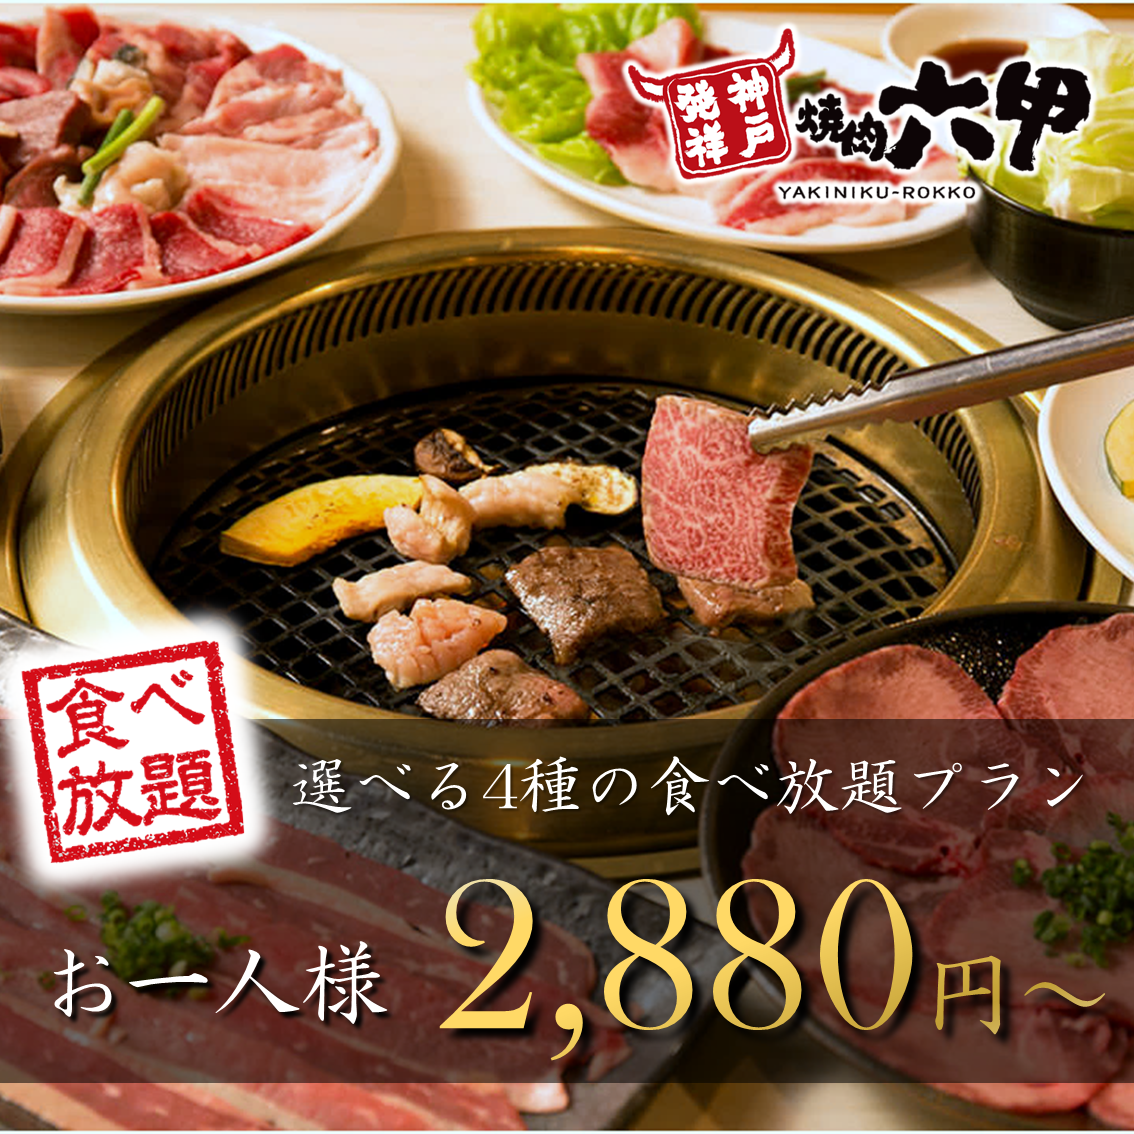 All-you-can-eat and drink starts from 4,760 yen ♪ Pickled short ribs are also OK! Now accepting reservations for banquets! All-you-can-eat starts from 2,880 yen